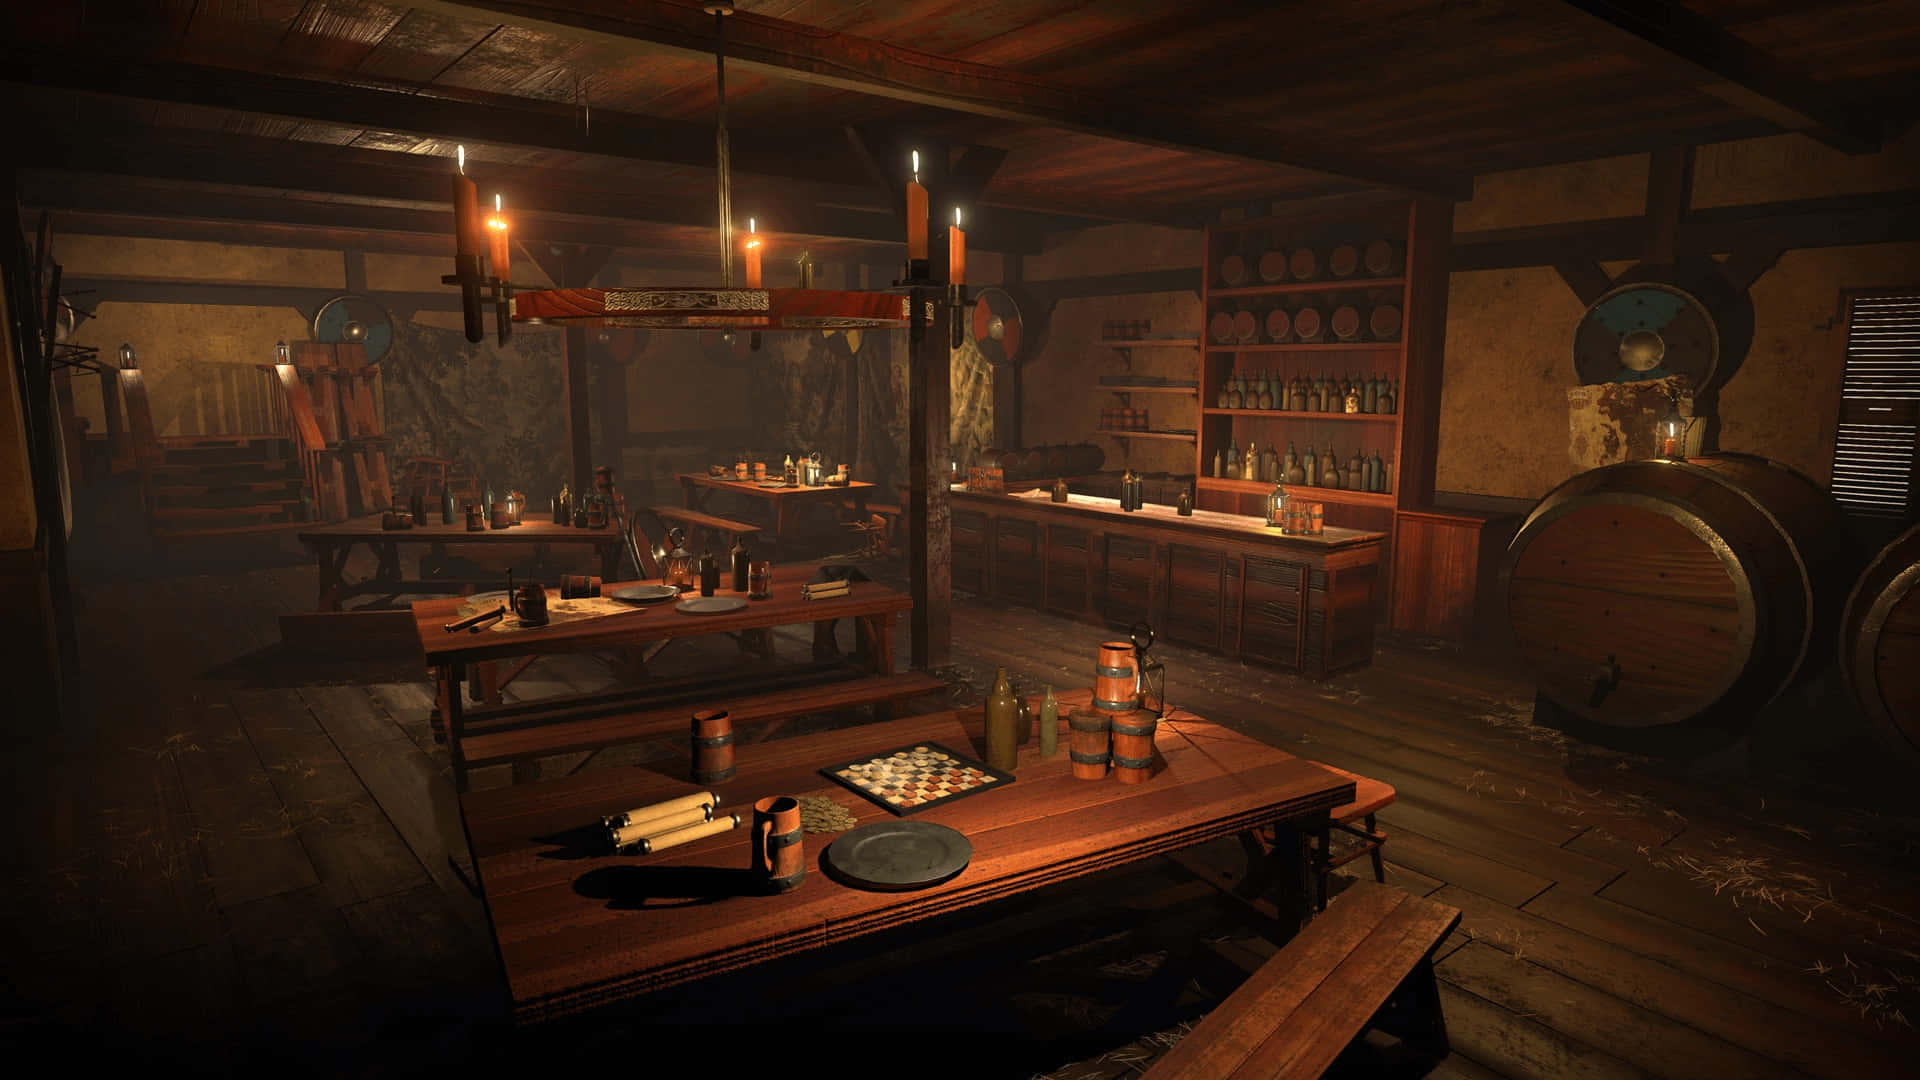 Enjoying a cozy evening inside a warm and welcoming tavern